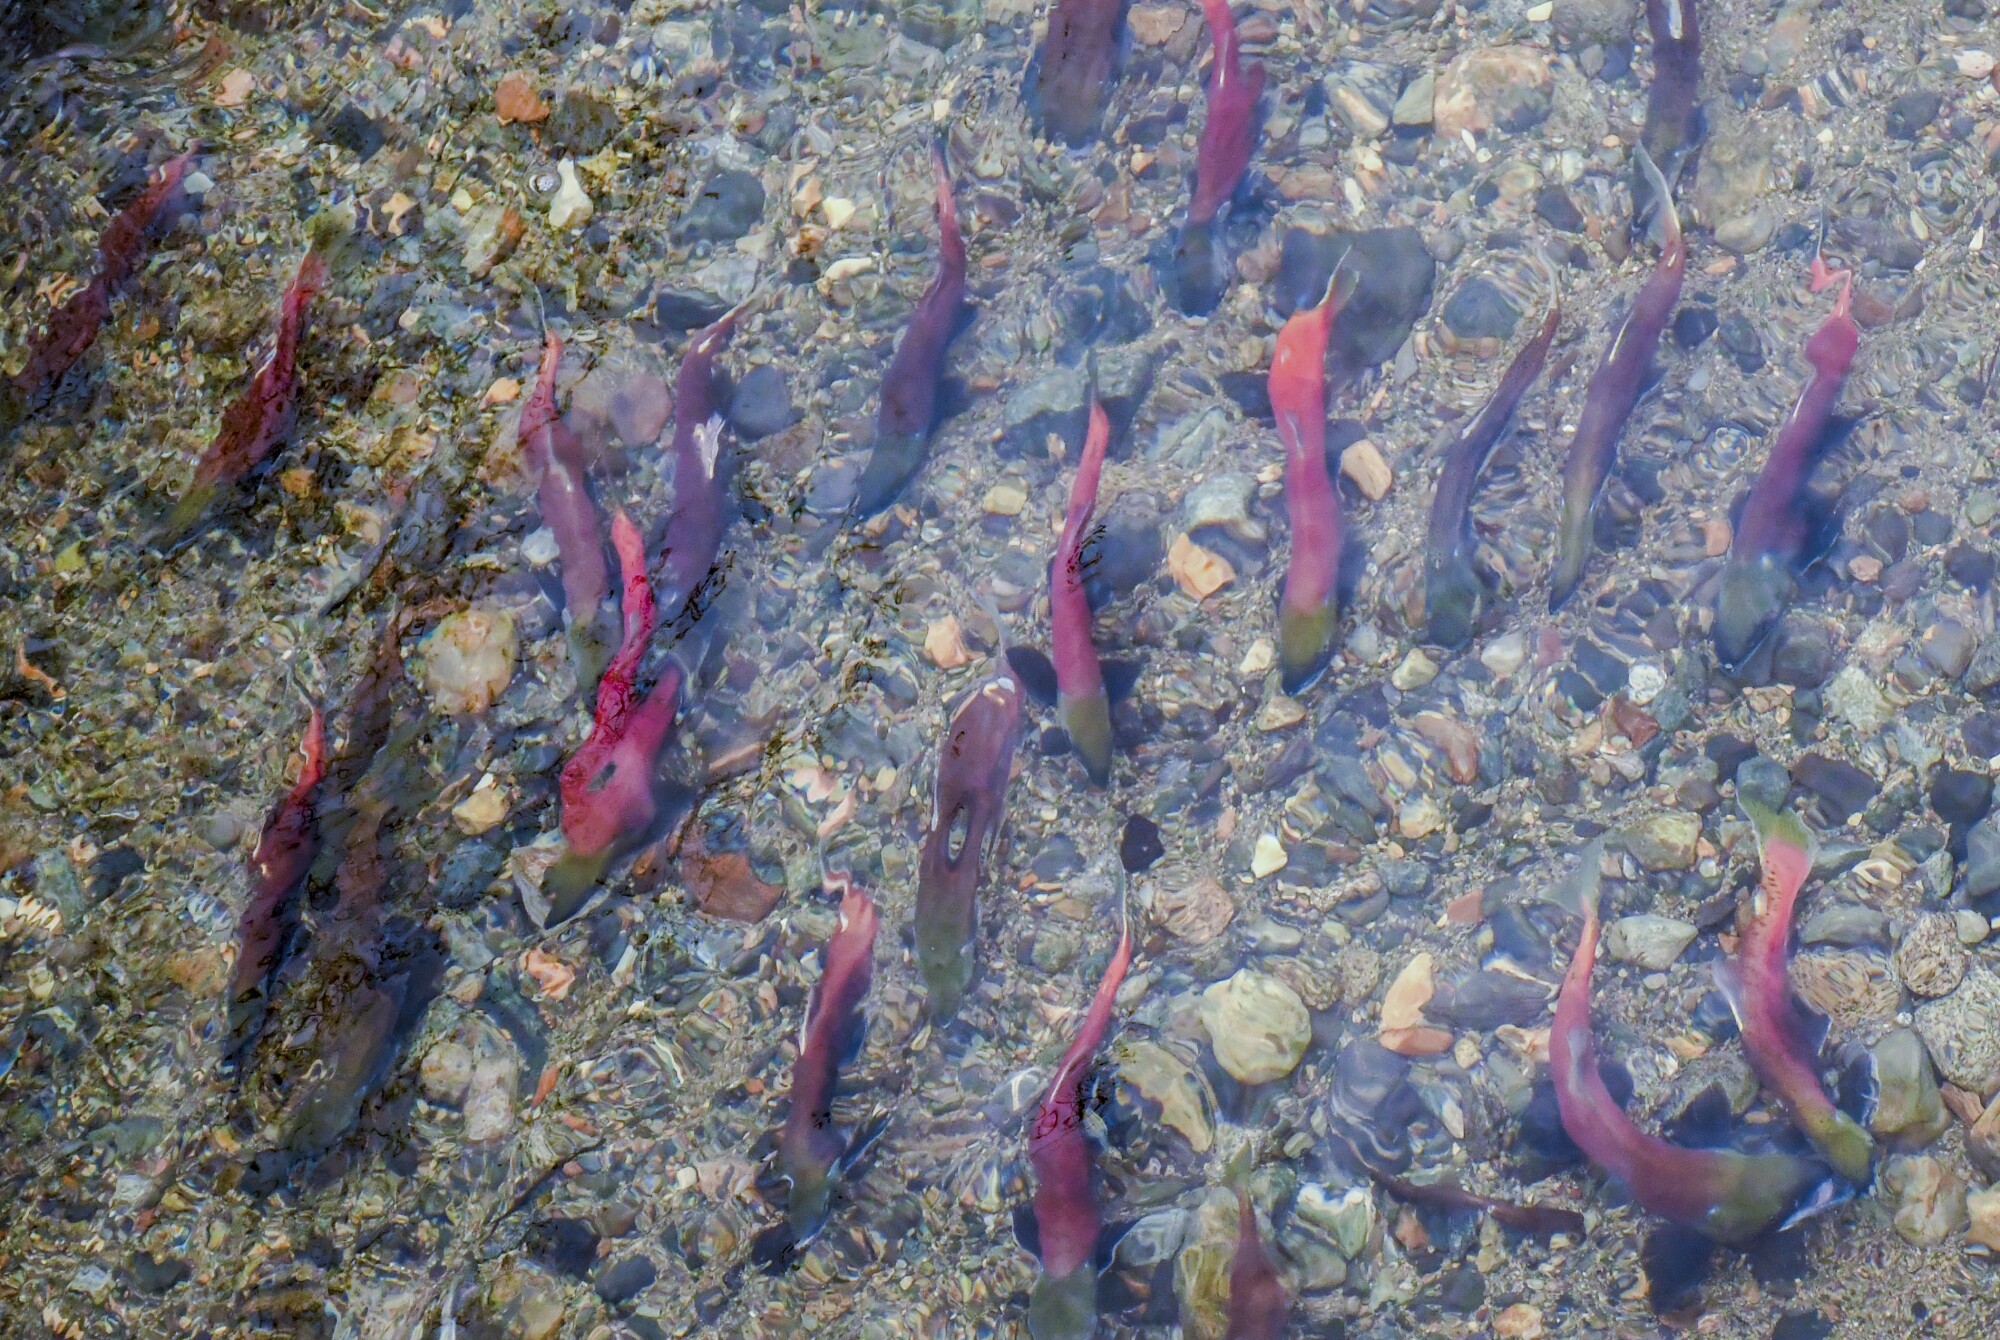 Each fall, visitors also have a chance to see kokanee salmon spawning, a phenomenon in which the fish turn red.